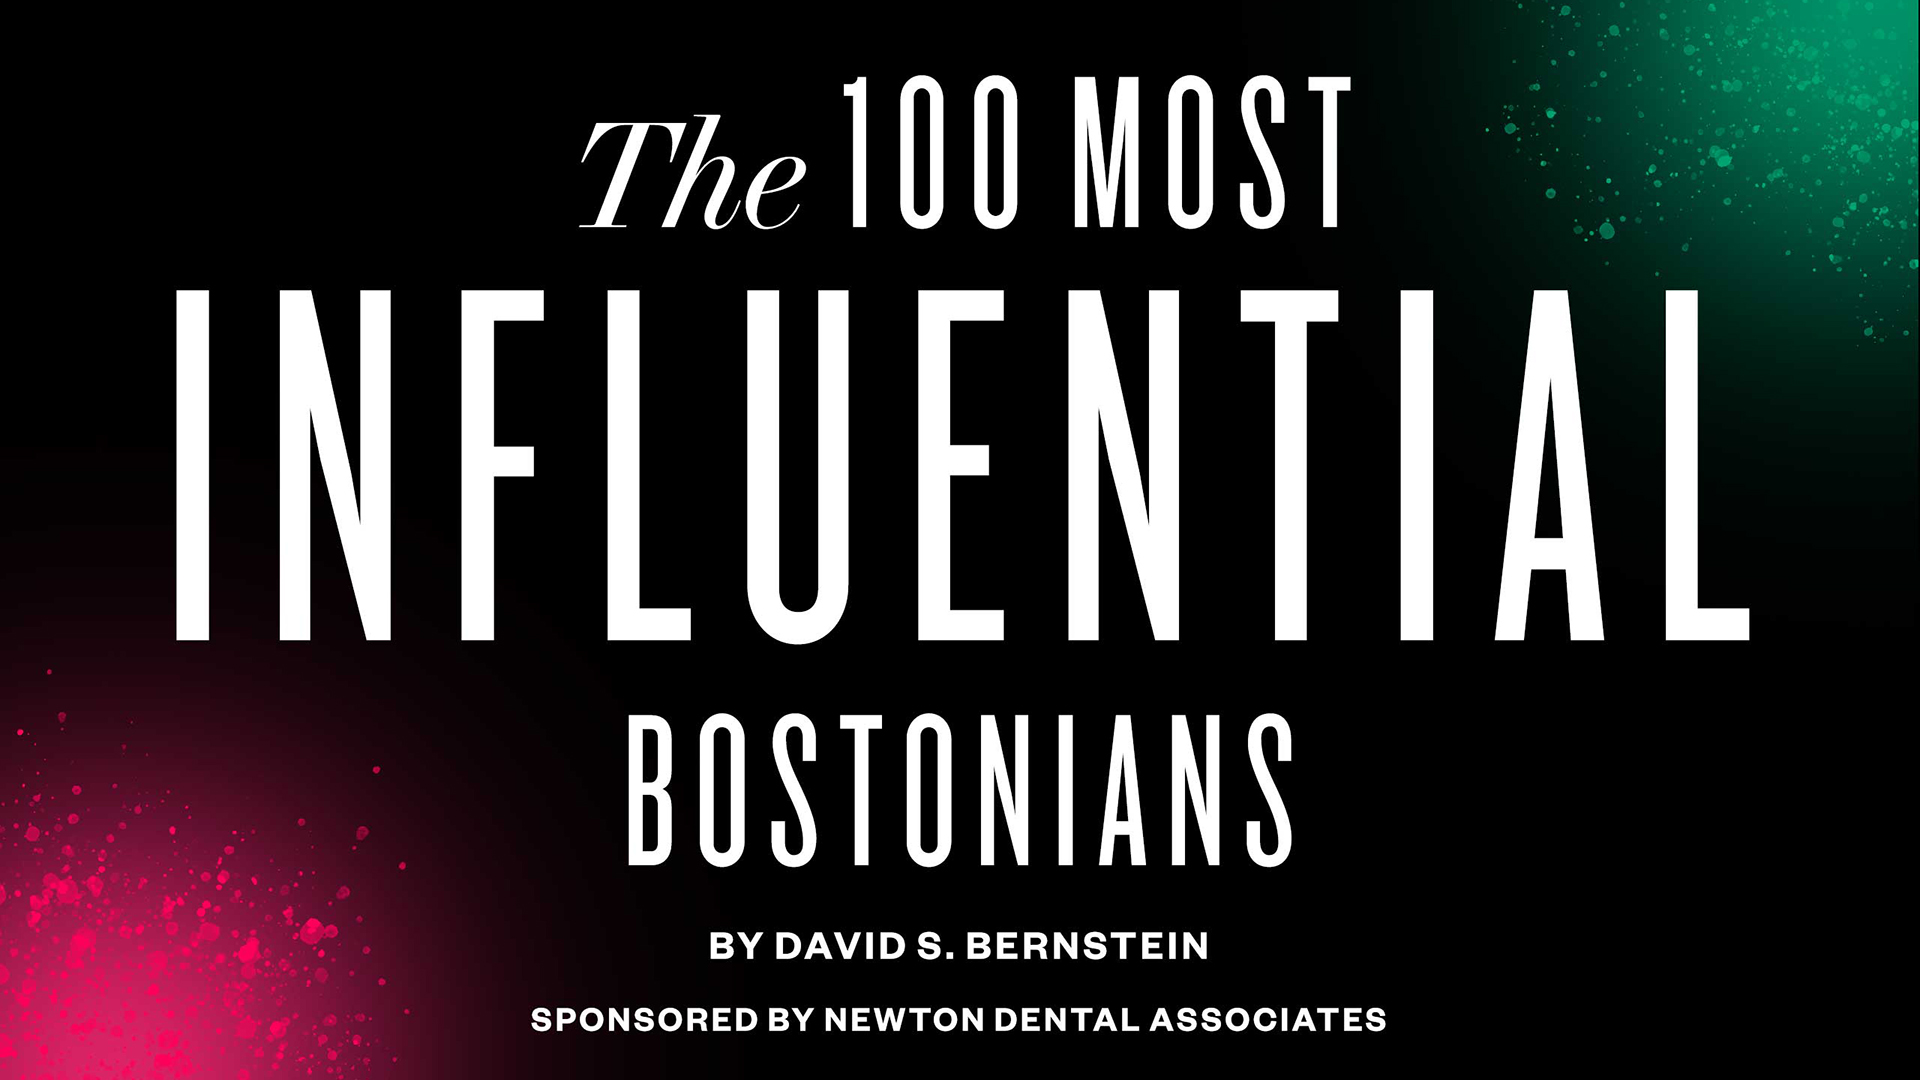 Boston Mag 100 most influential Bostonians